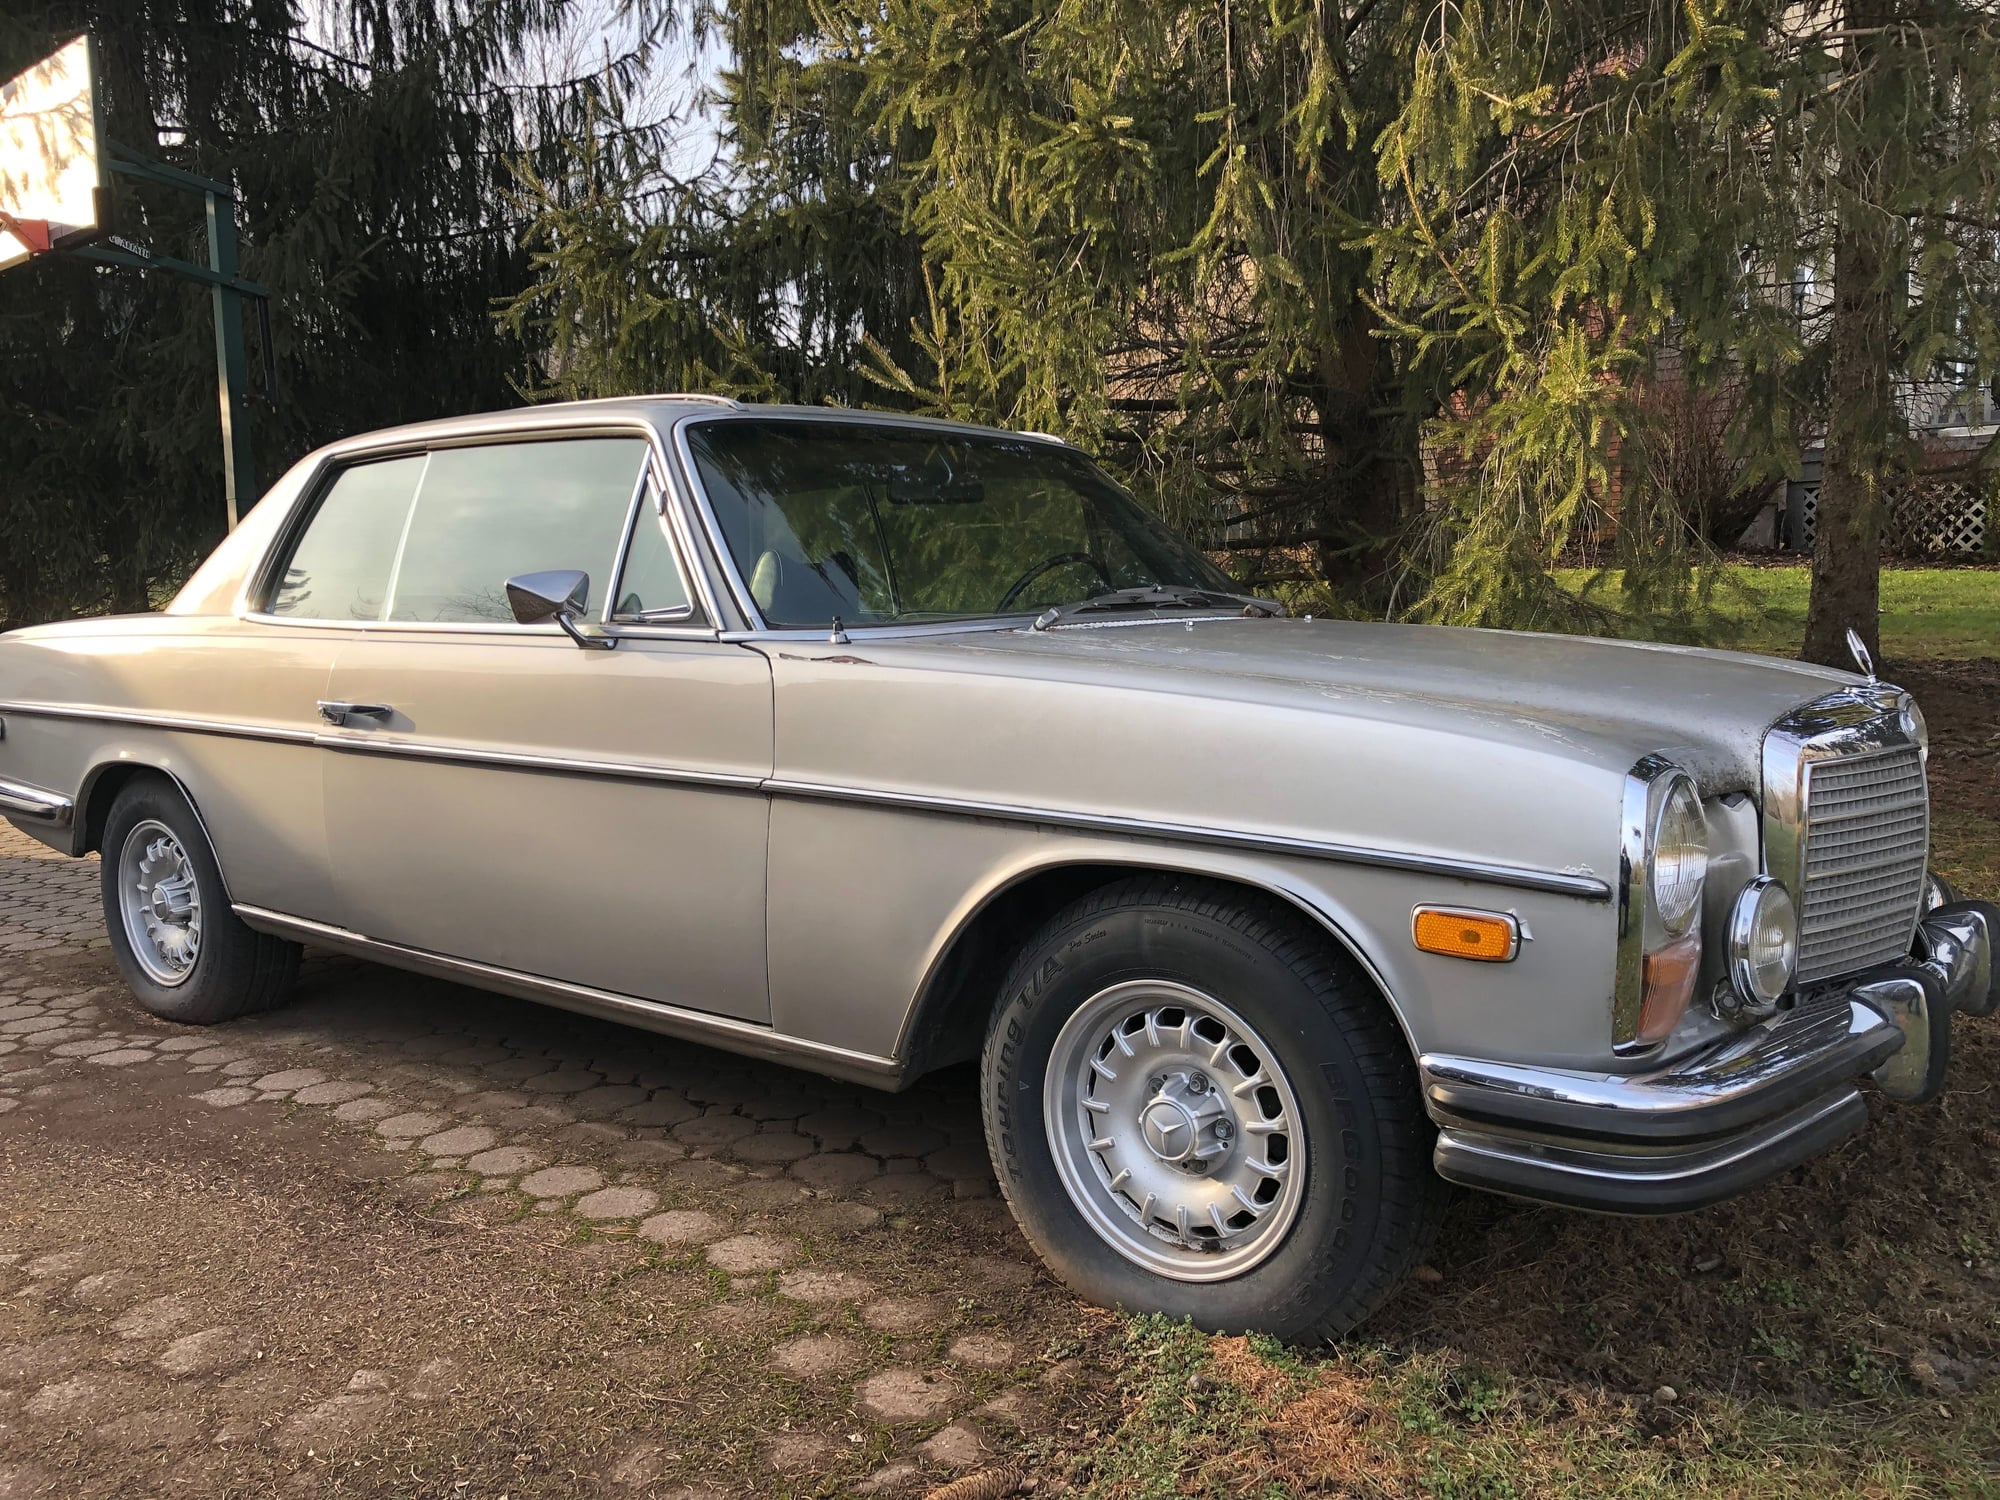 1972 Mercedes-Benz 250C - For Sale 1972 250C - Used - VIN 114.023-12-006619 - 68,000 Miles - 6 cyl - 2WD - Automatic - Coupe - Gray - Basking Ridge, NJ 07920, United States